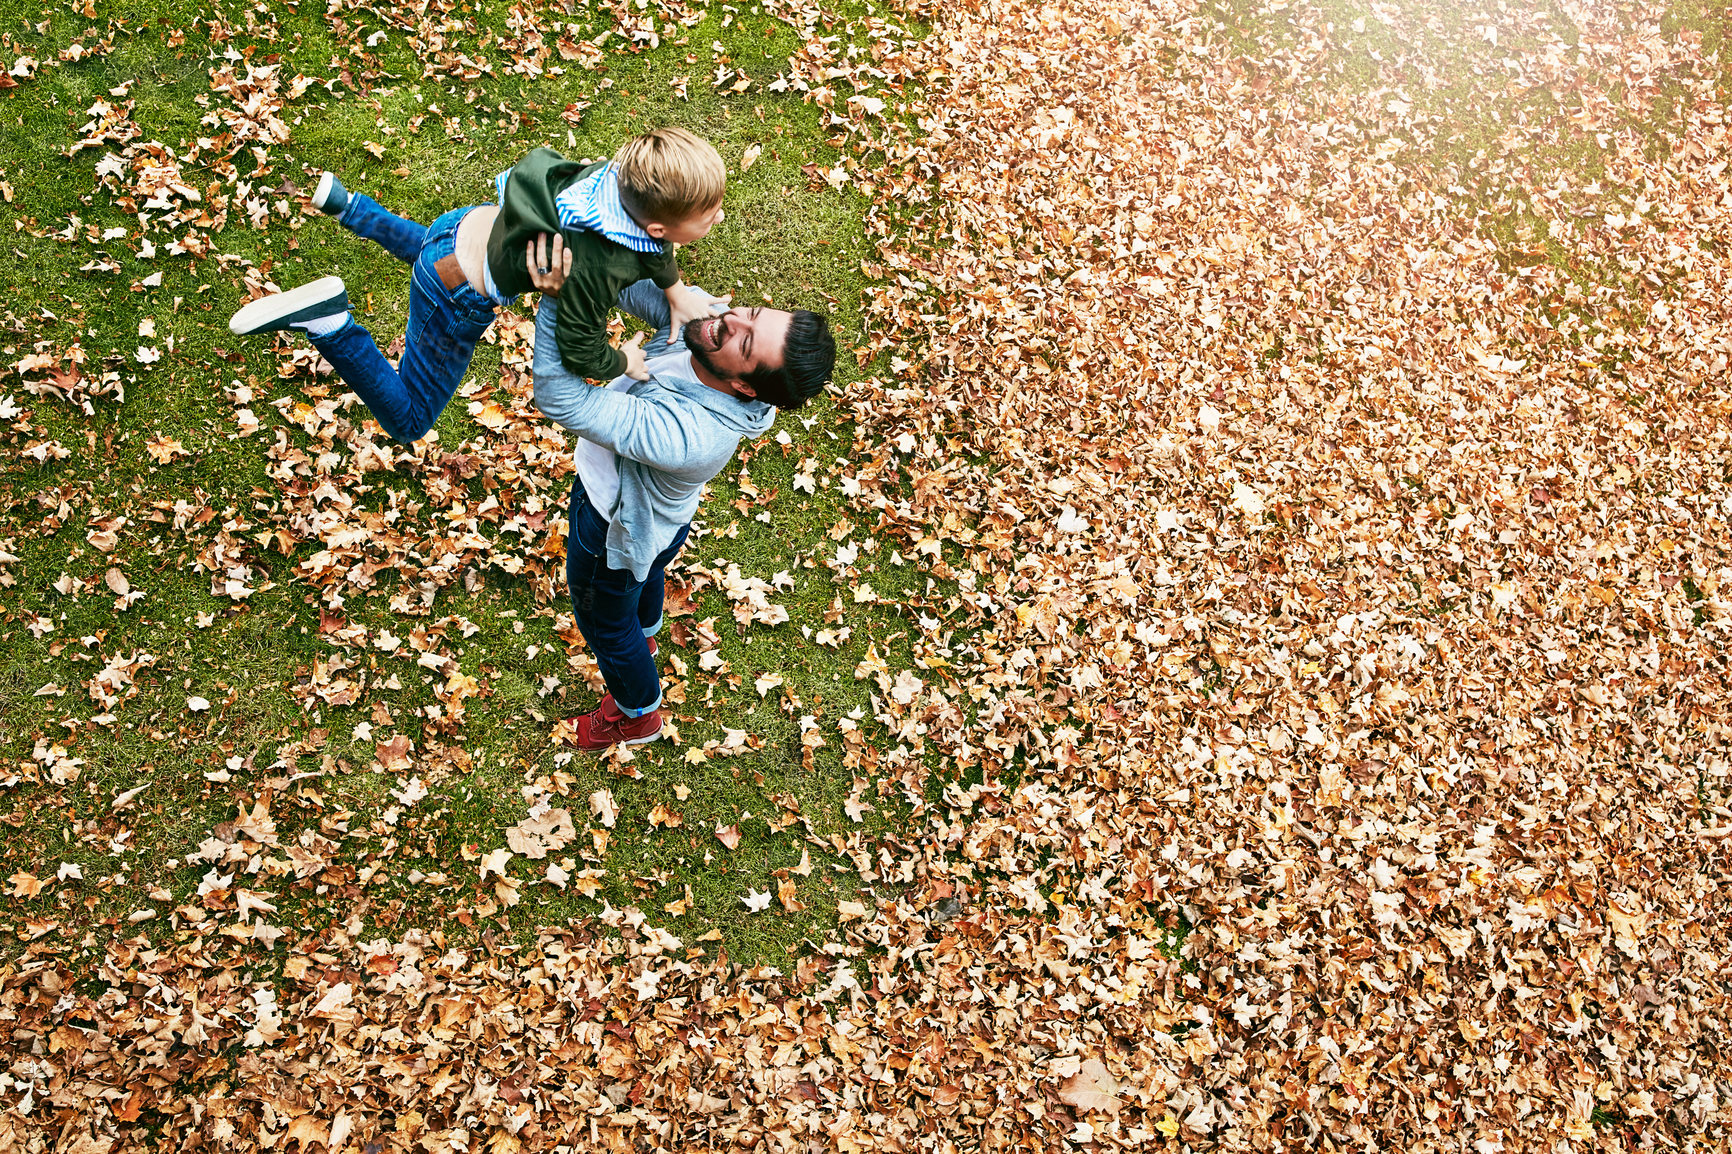 Buy stock photo Shot of a father and his little son playing in the autumn leaves outdoors